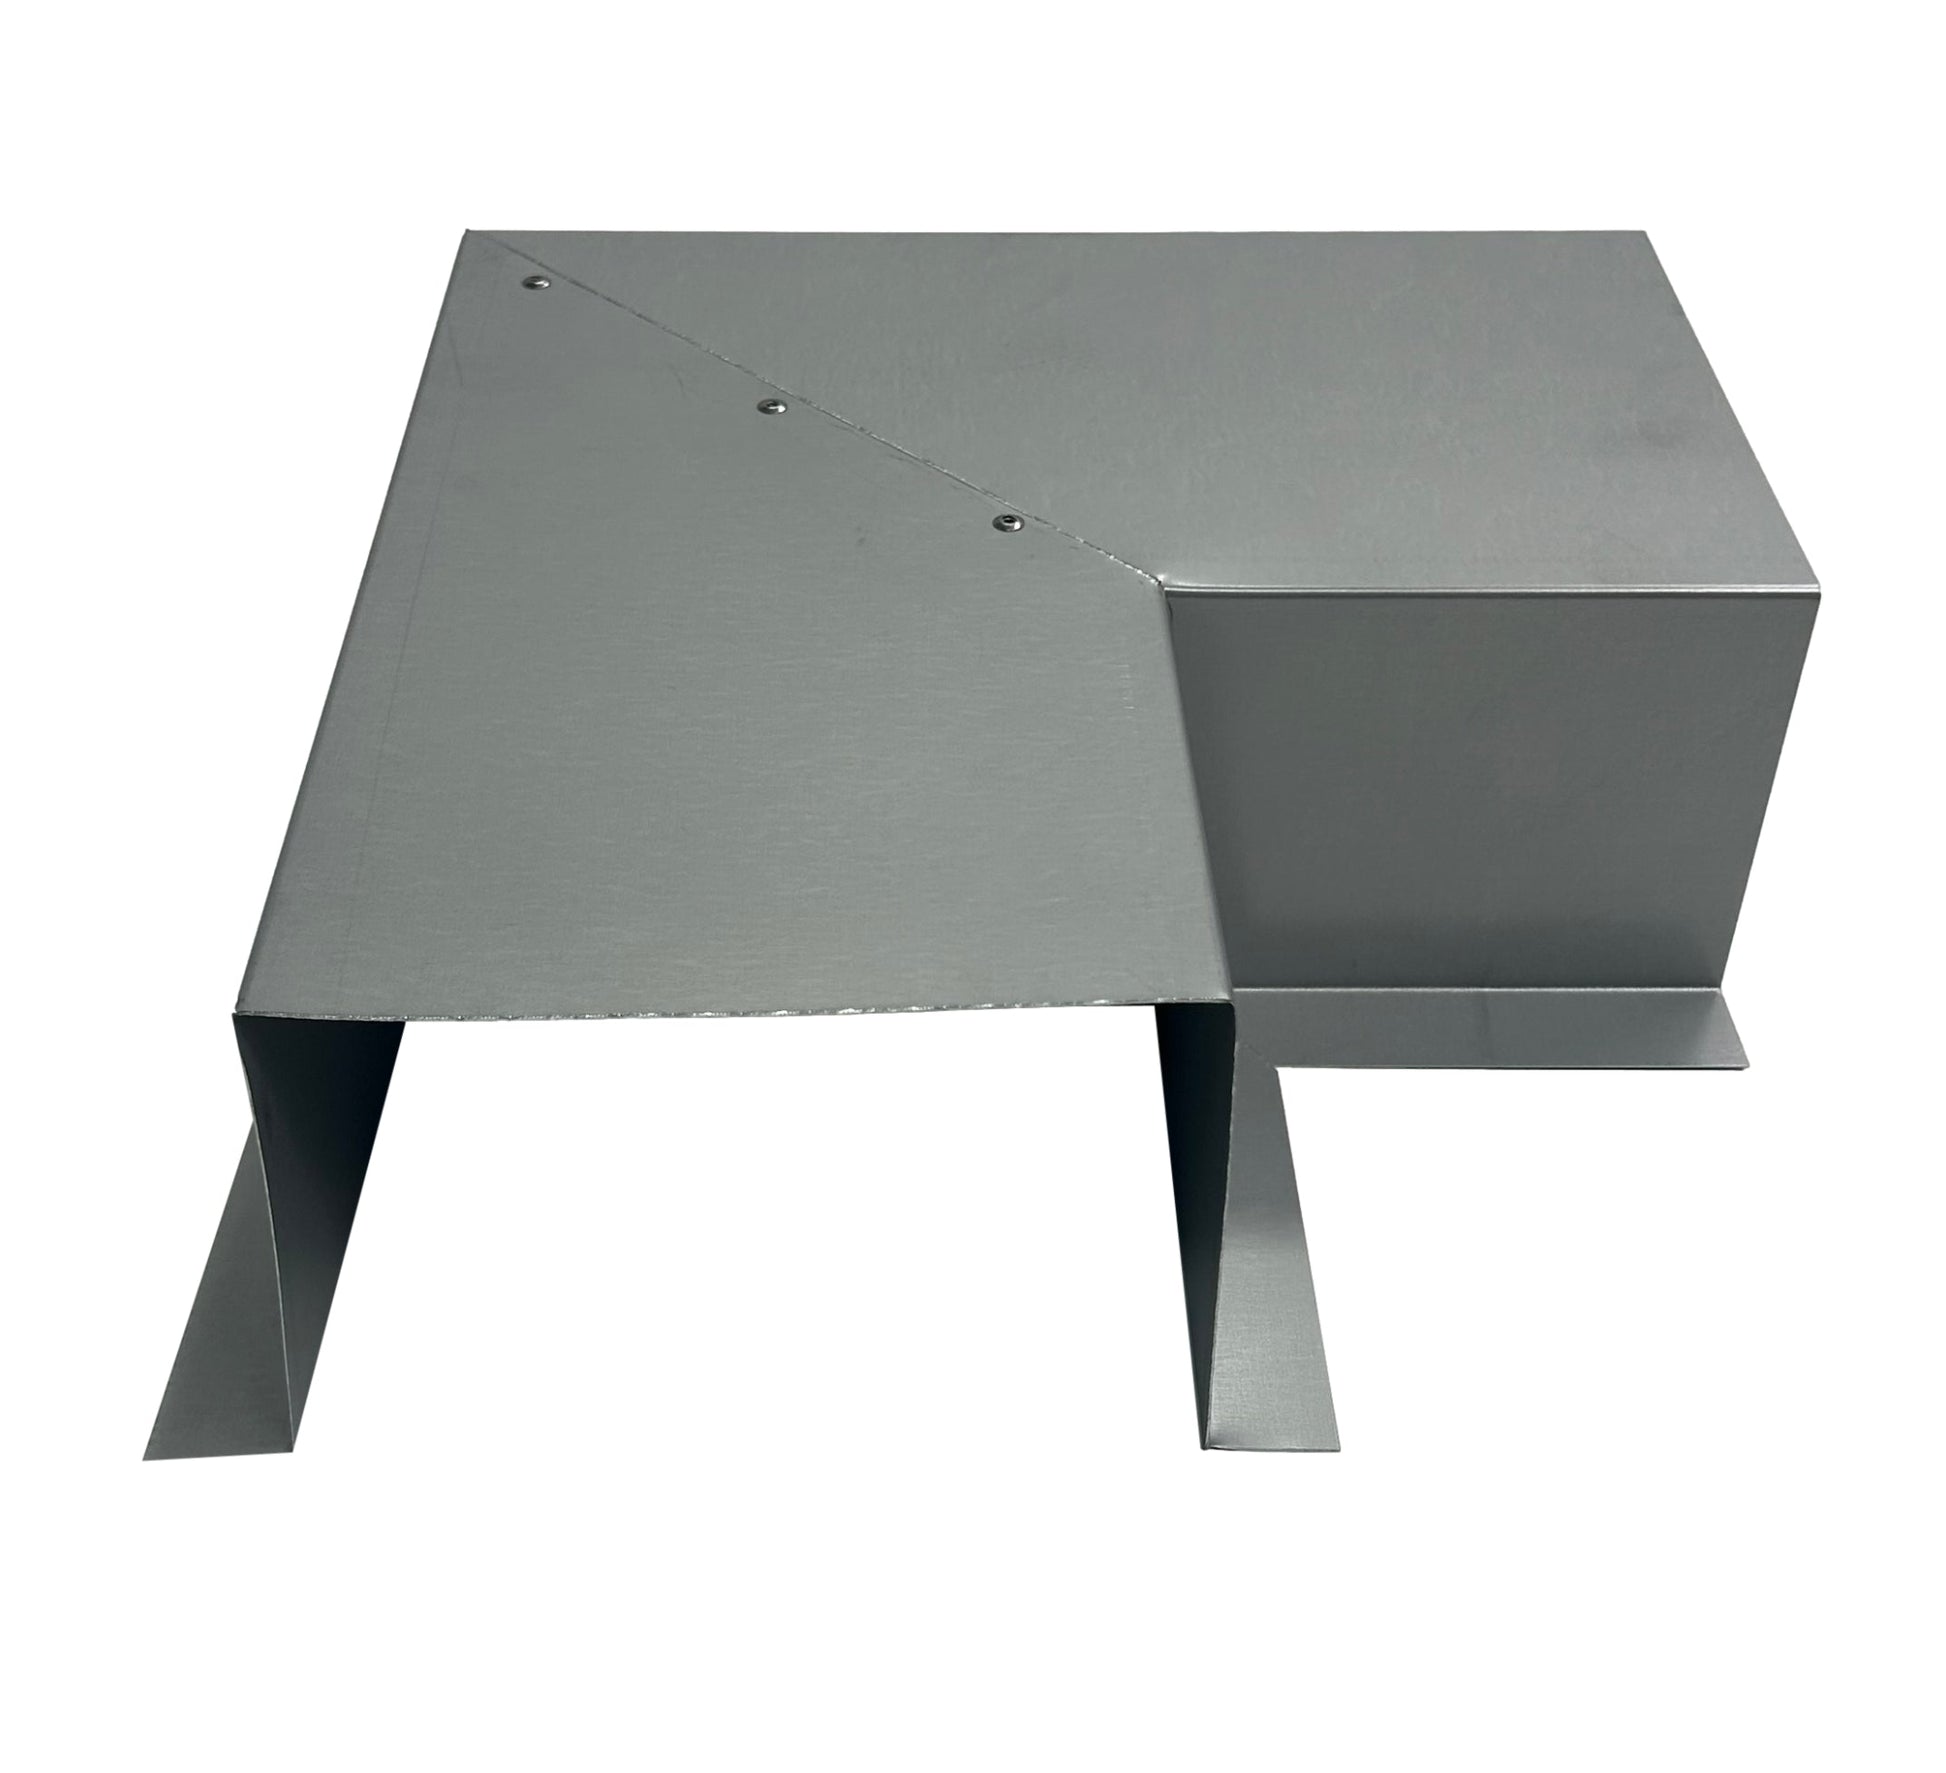 A gray, metallic vent cover with a rectangular box shape on one side and an angled, triangular flap extending downward. Featuring rivets along the edge of the angled part, this Perma Cover Residential Series - Line Set Cover Side Turning Elbows - Premium Quality sits on a flat surface, possibly for use in HVAC systems or ductwork for easy installation.